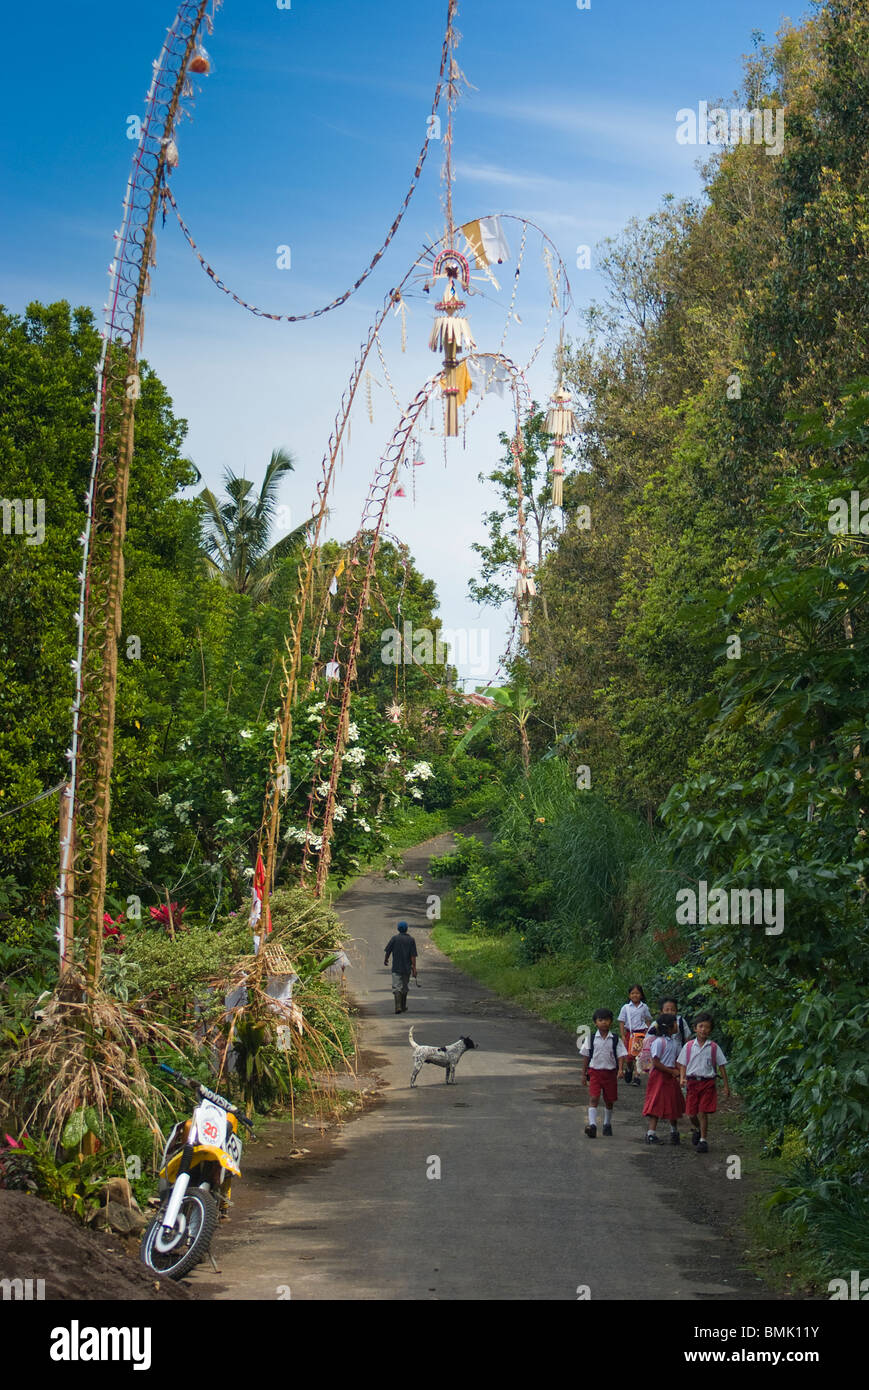 In the small village of Umajero, Bali, the holy day of Galungan is celebrated by the construction of decorated bamboo 'Penjor'. Stock Photo